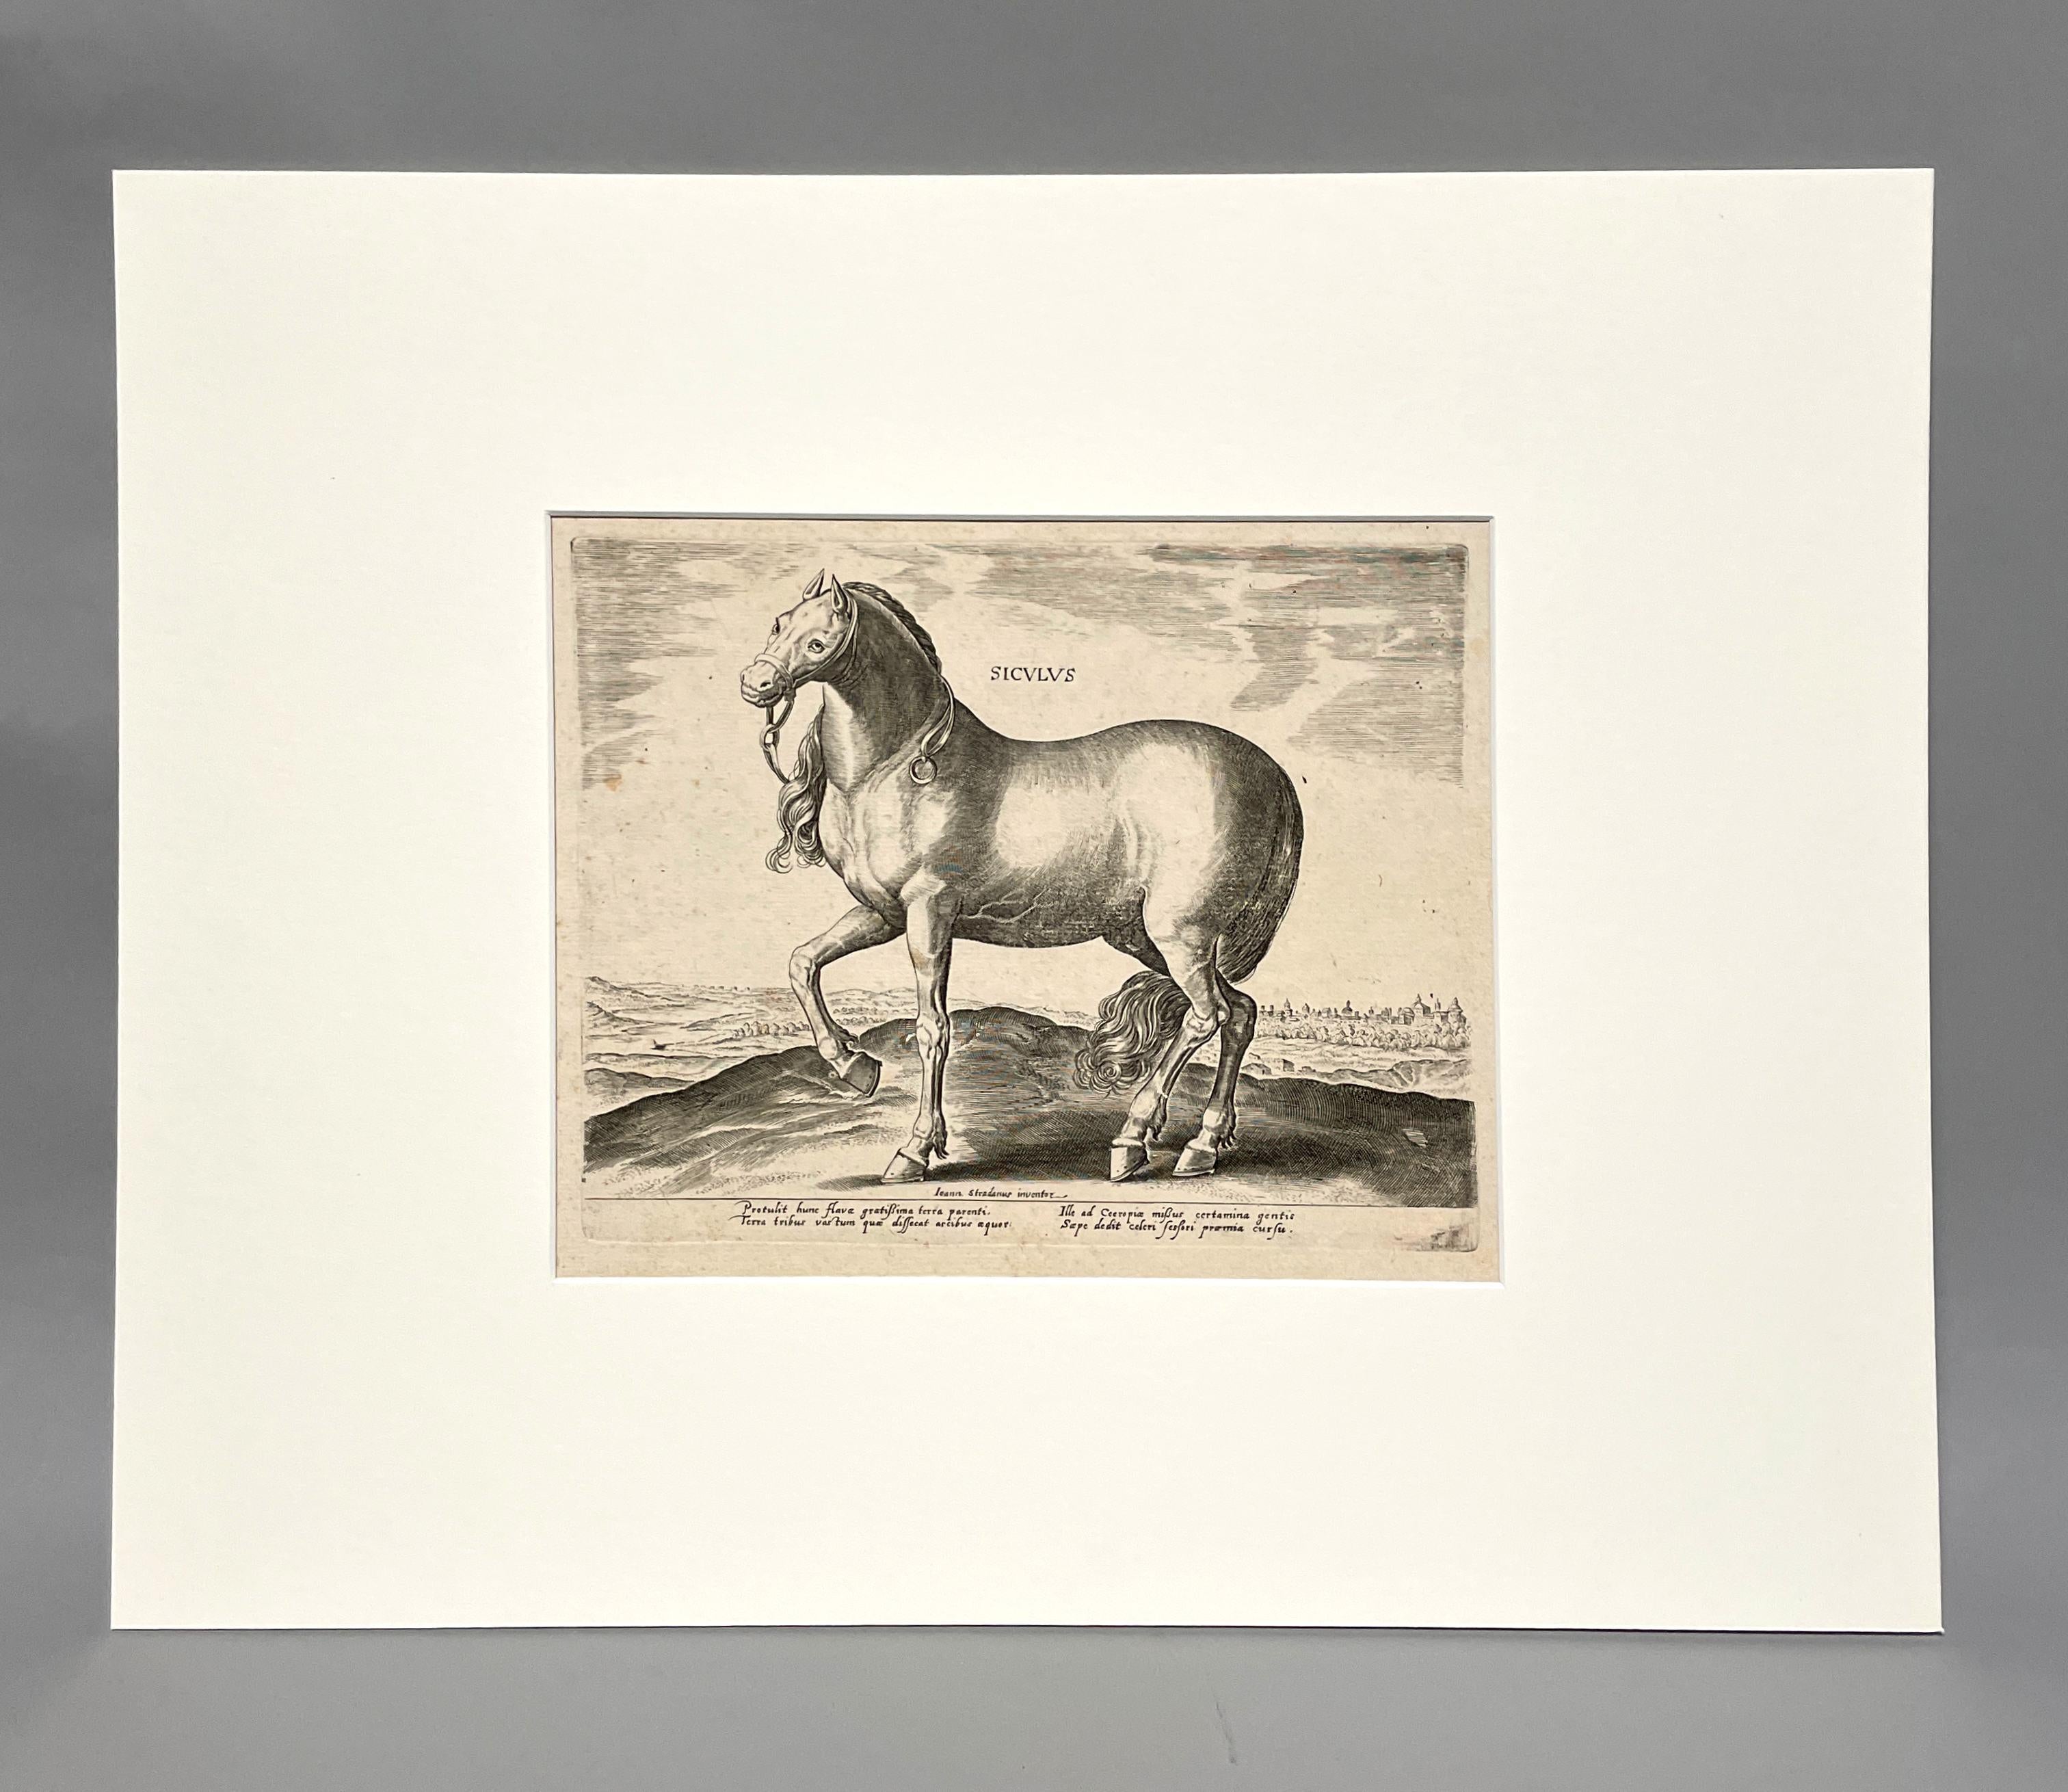 Siculus - from the portfolio “The Stables of Don John of Austria”  - Print by Jan Van der Straet